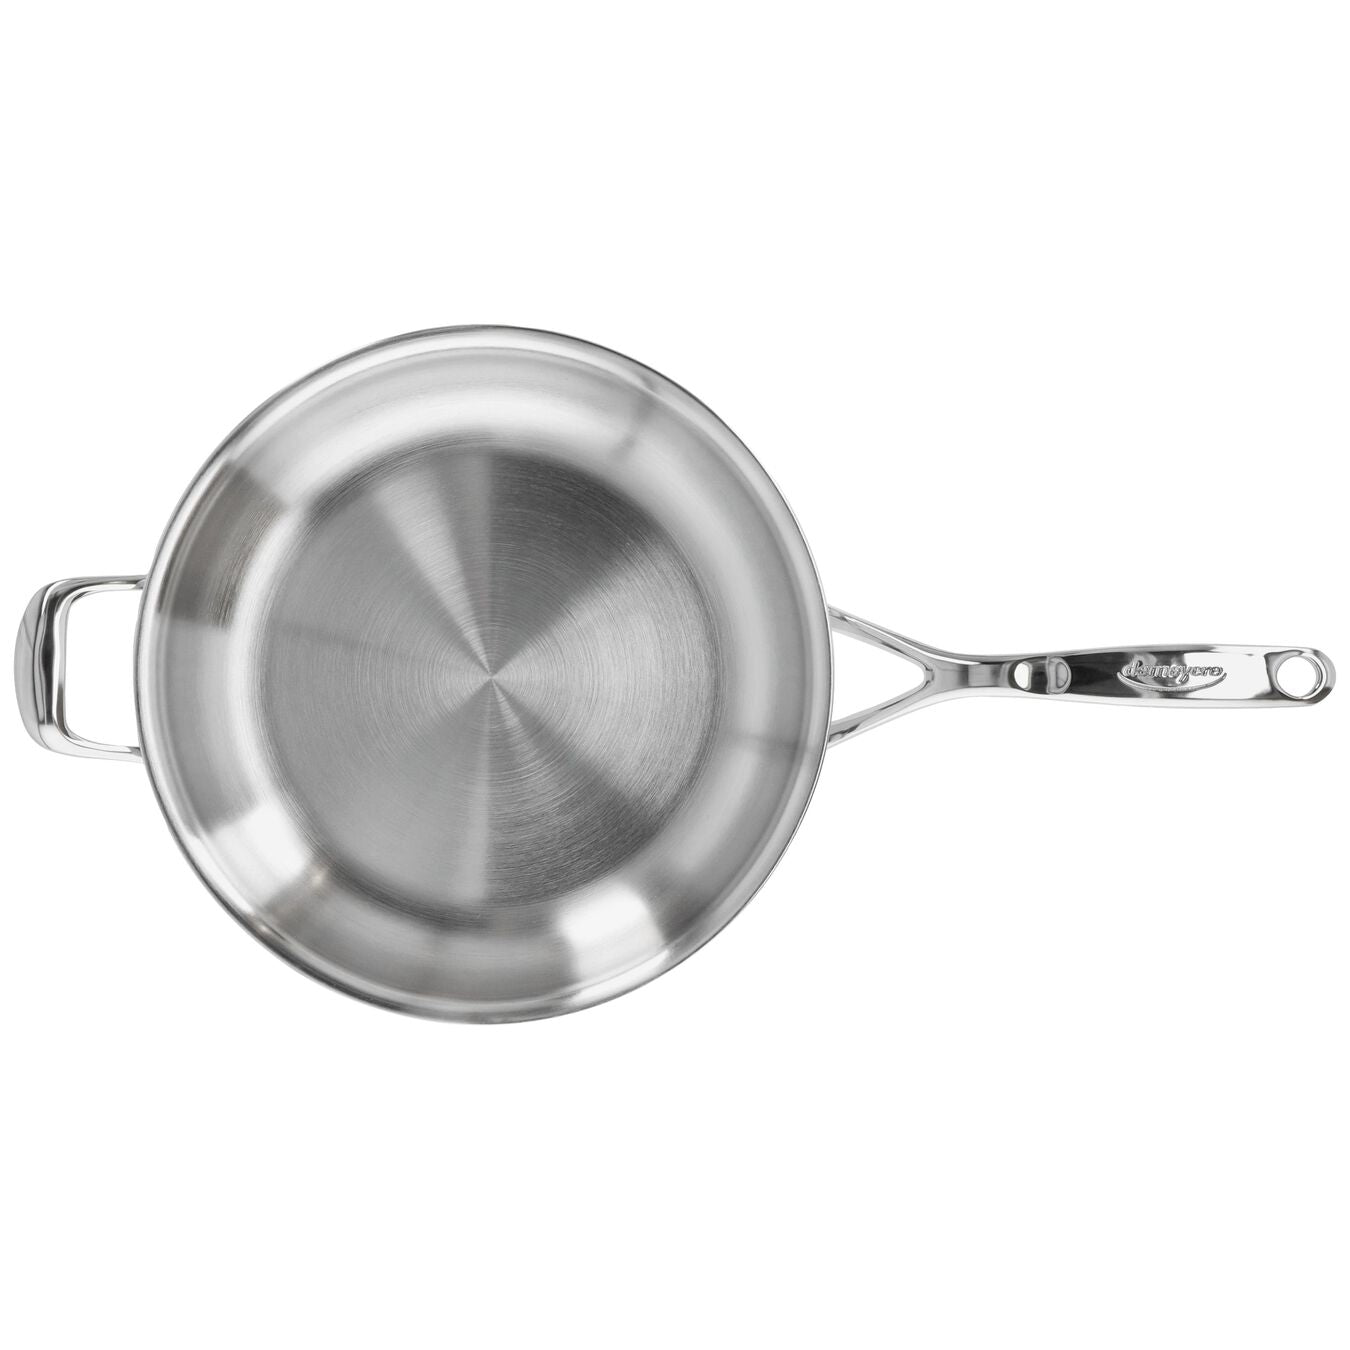 Demeyere Proline 7 Collection 28 cm / 11" 18/10 Stainless Steel Frying Pan Side